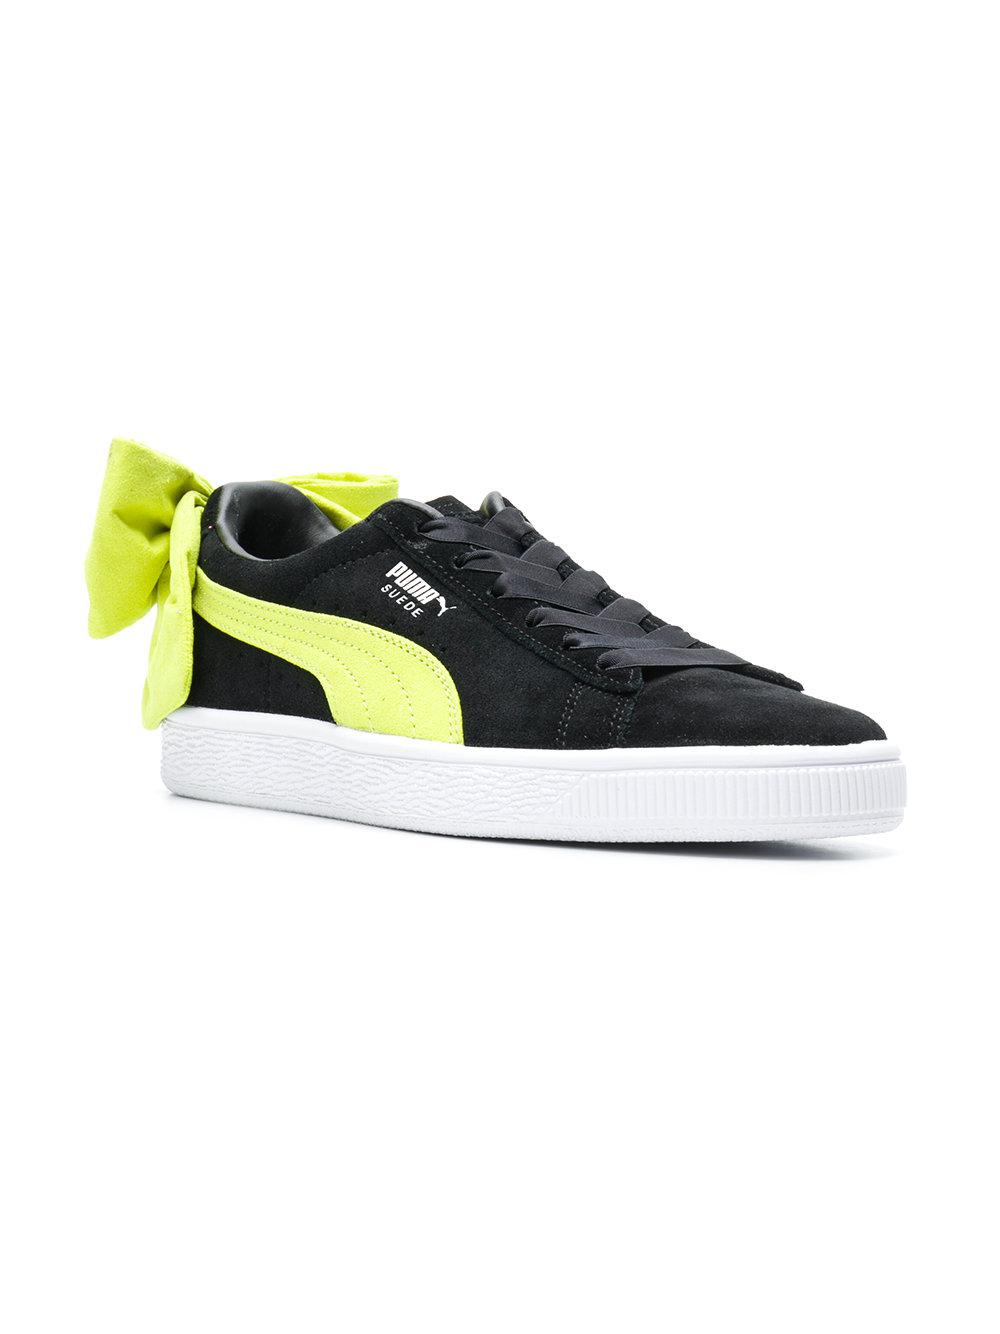 PUMA Suede Bow Back Sneakers in Black | Lyst